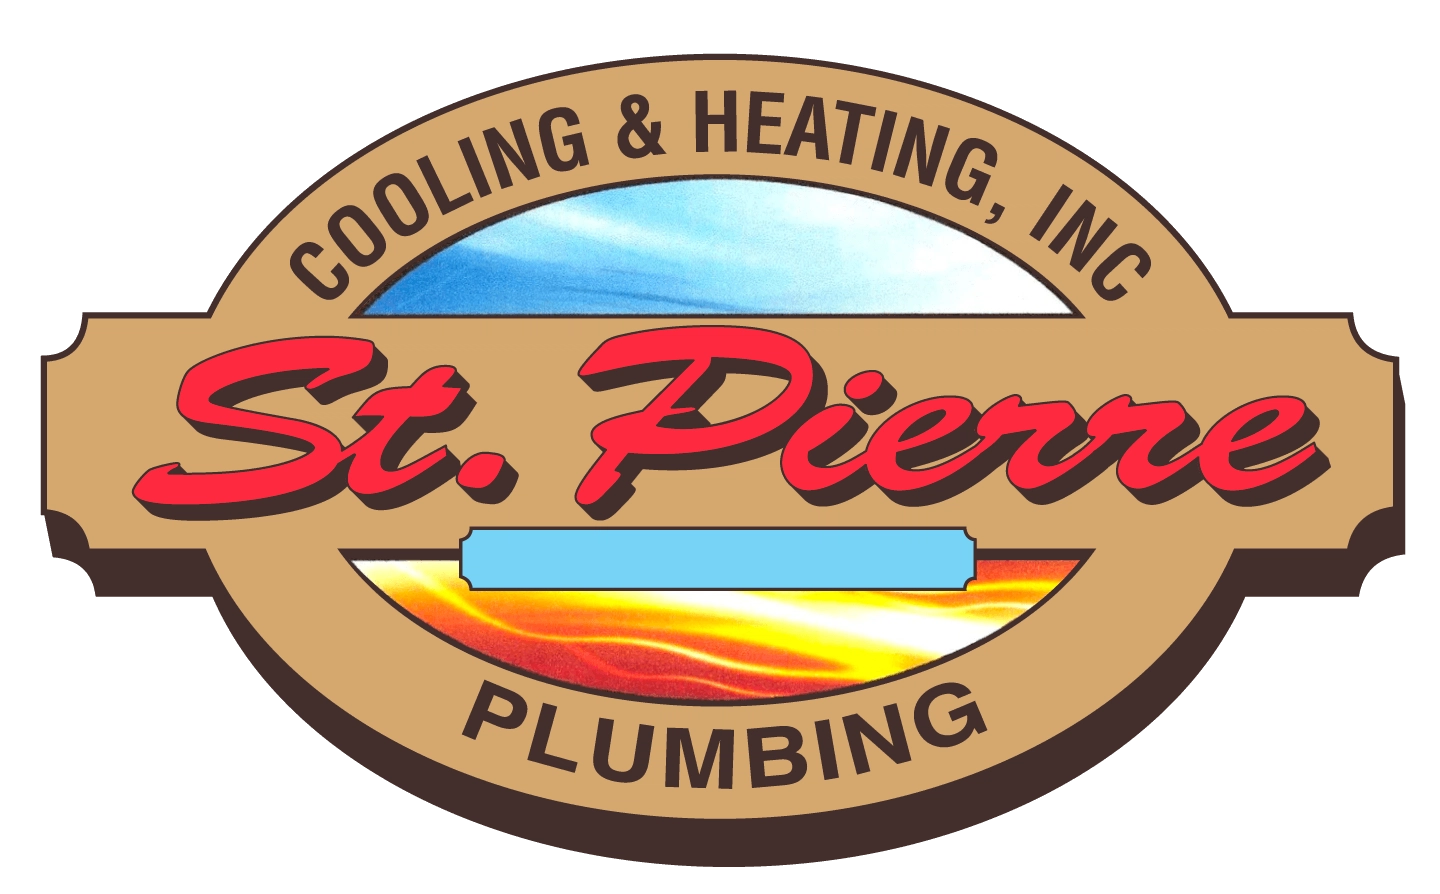 St Pierre Cooling & Heating Inc Logo